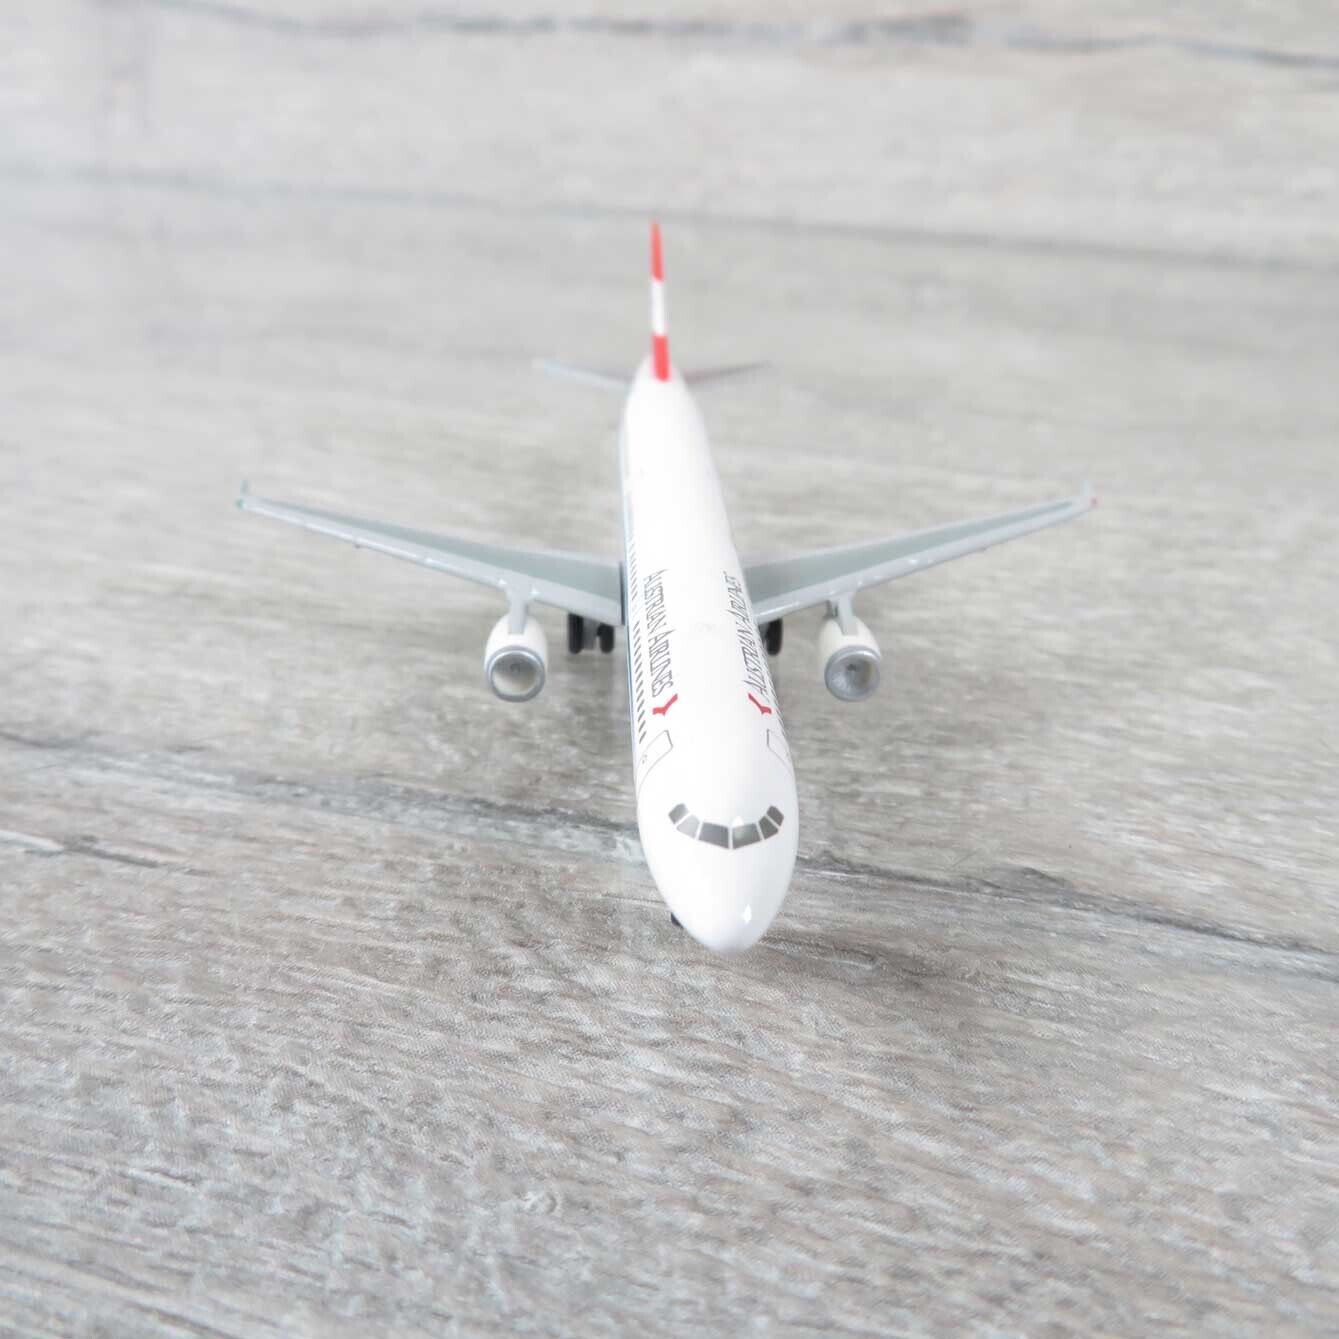 HERPA 508629 - 1:500 - Austrian Airlines Airbus A321 - OVP -  #78854